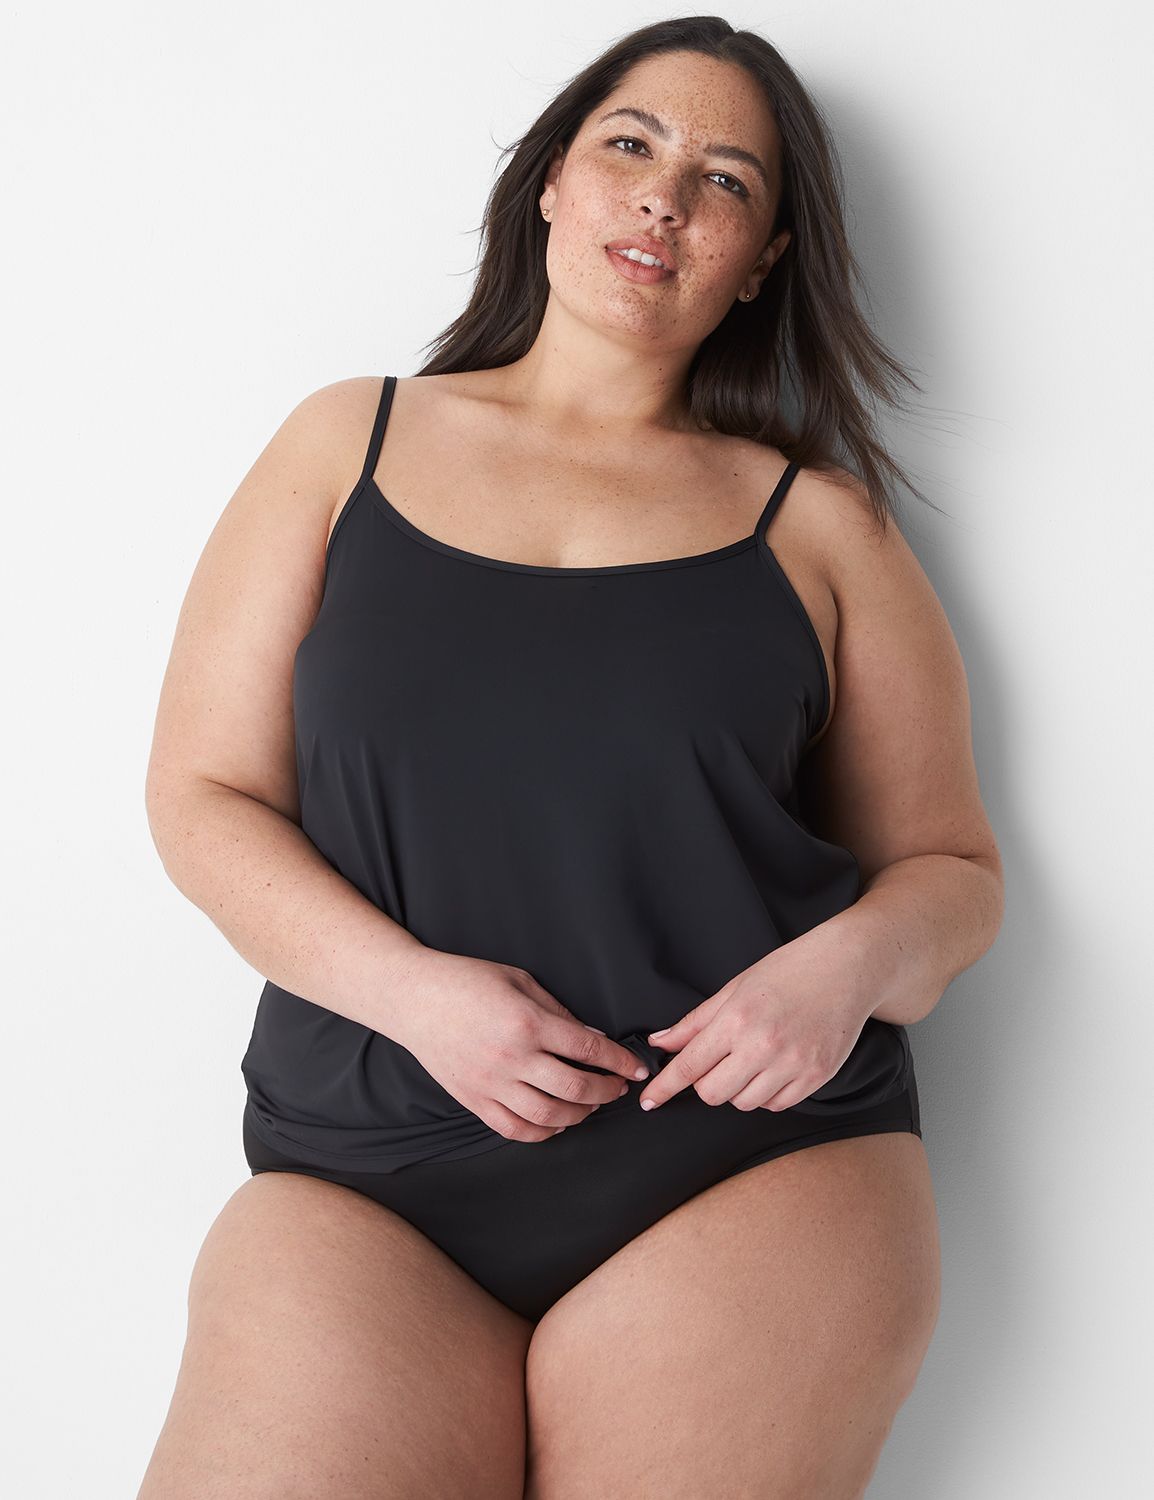 Antelope Valley Mall ::: Deal ::: All Shapewear 50% off ::: Lane Bryant